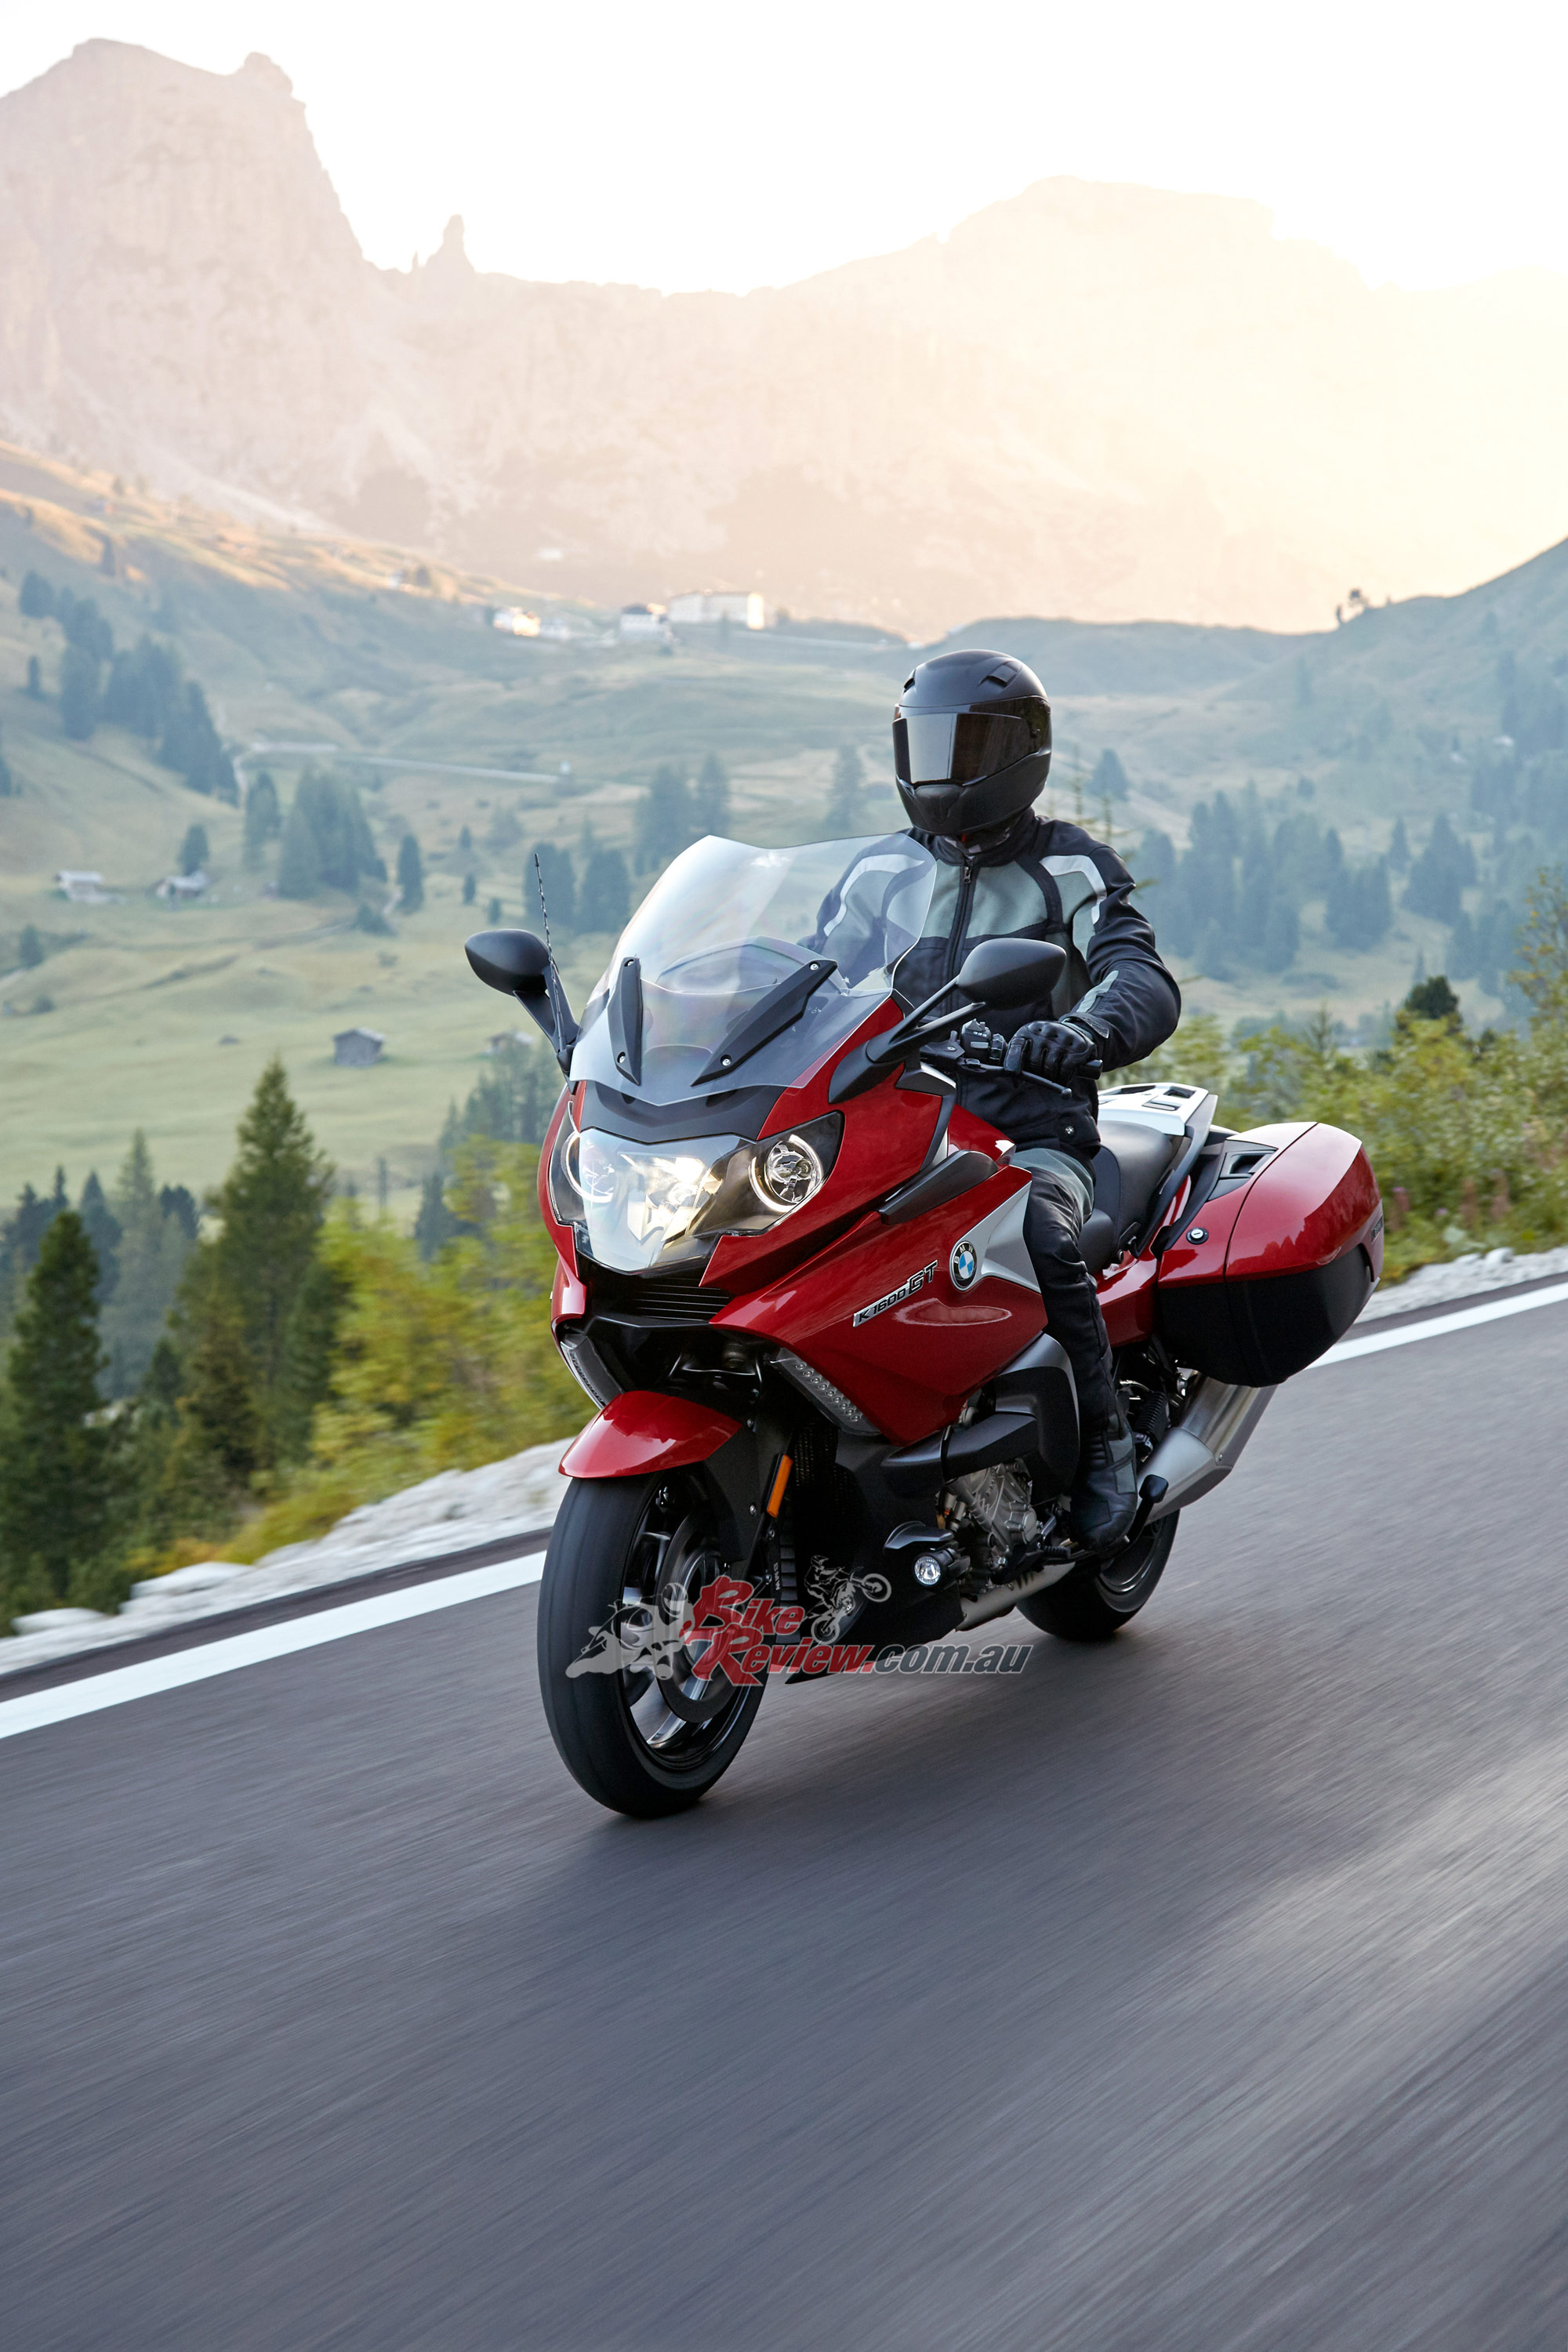 2021 BMW K 1600 GTL First Look (7 Fast Facts from European 